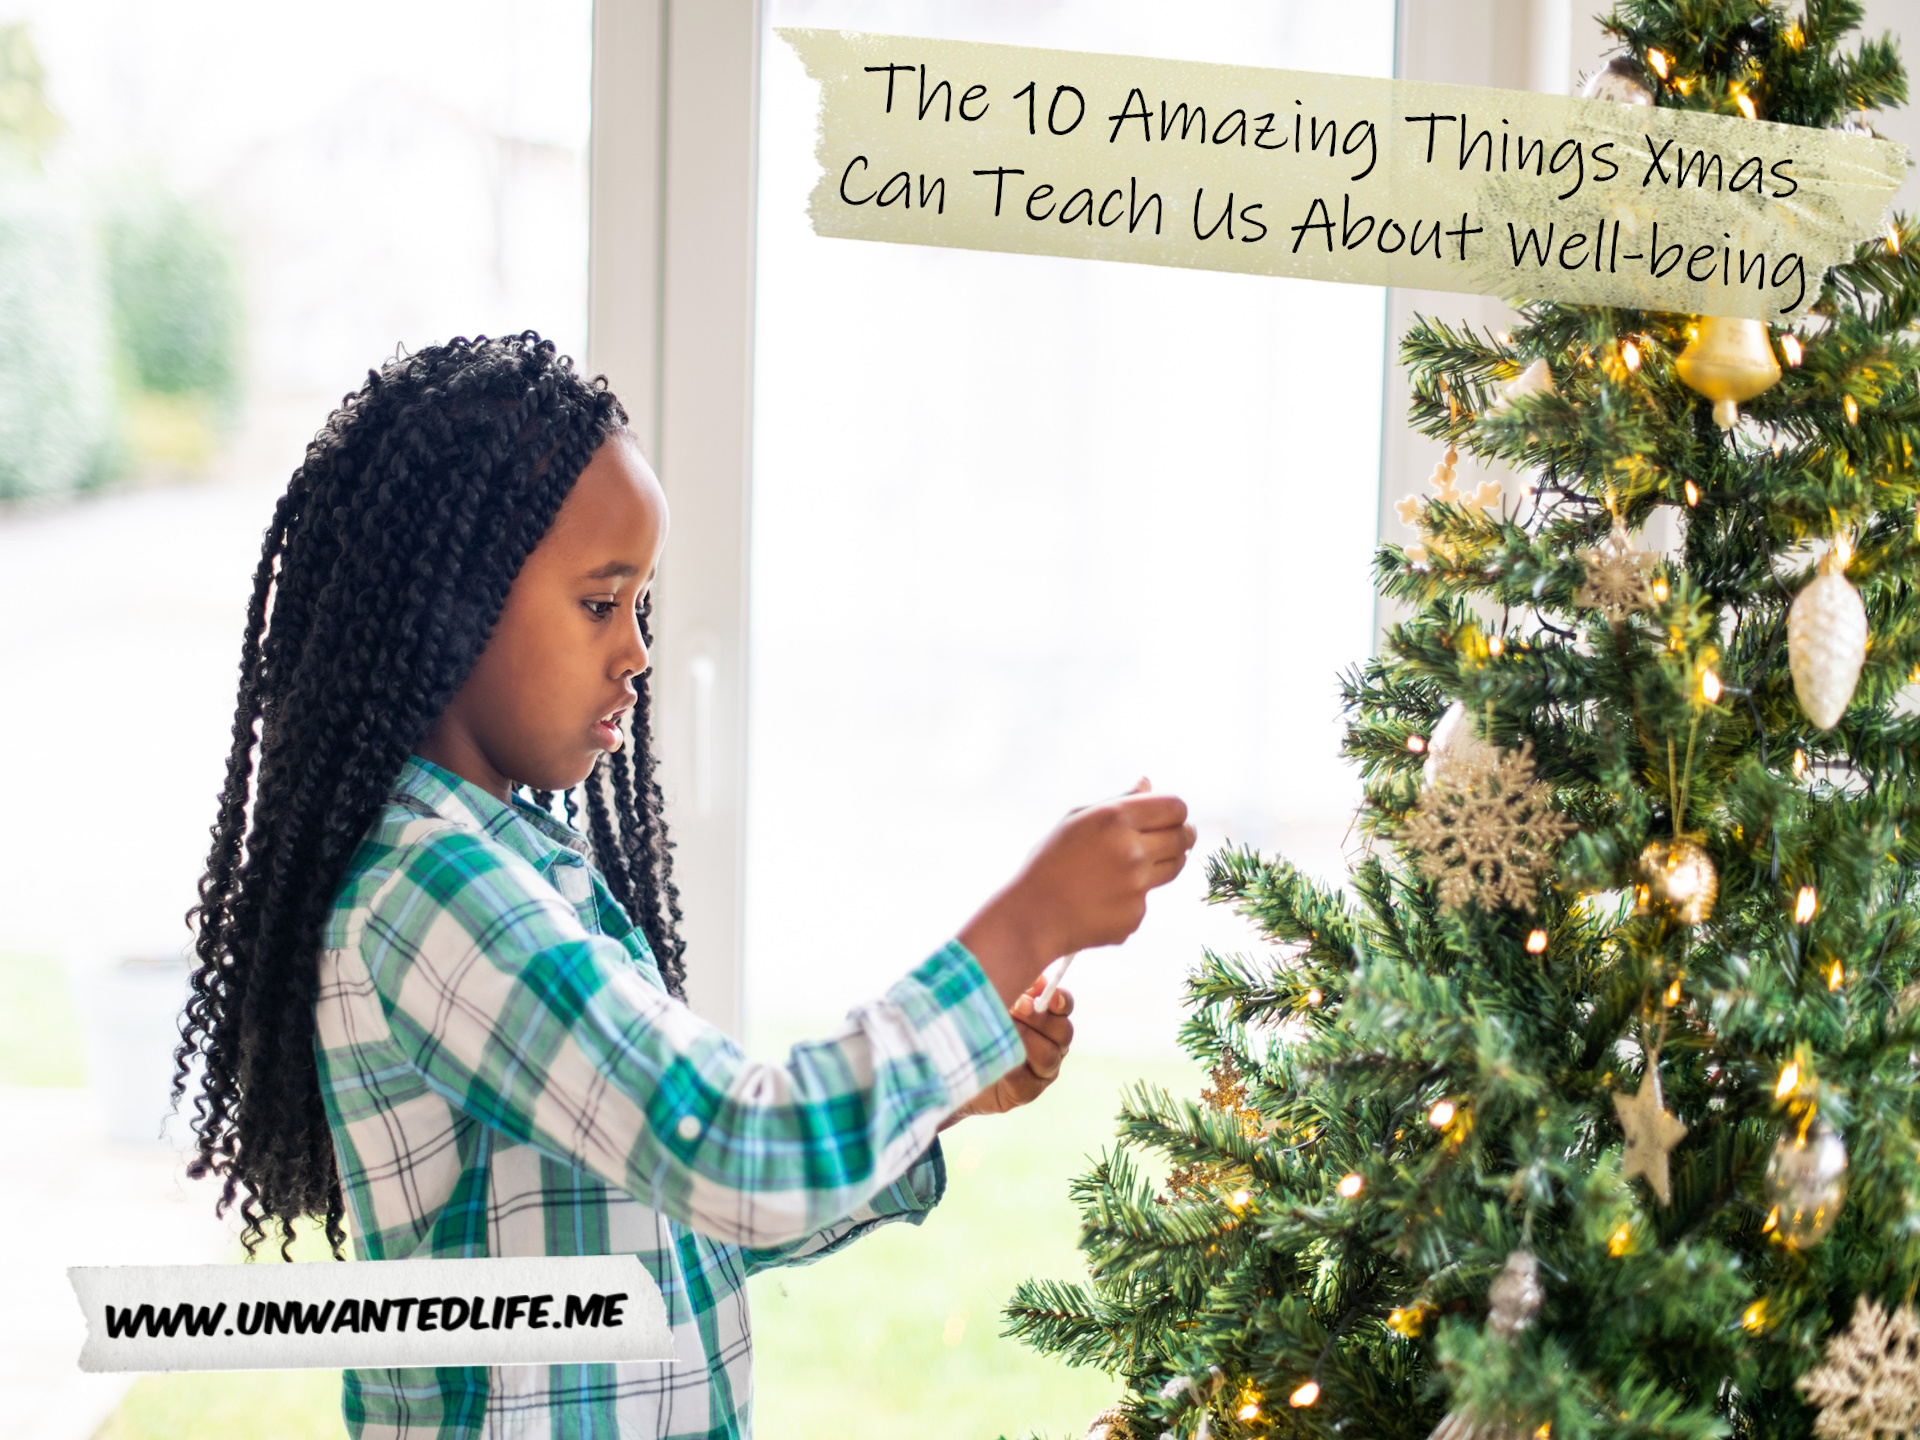 A photo of a young Black girl putting an ornament on the Christmas tree to represent the topic of the article - The 10 Amazing Things Xmas Can Teach Us About Well-being